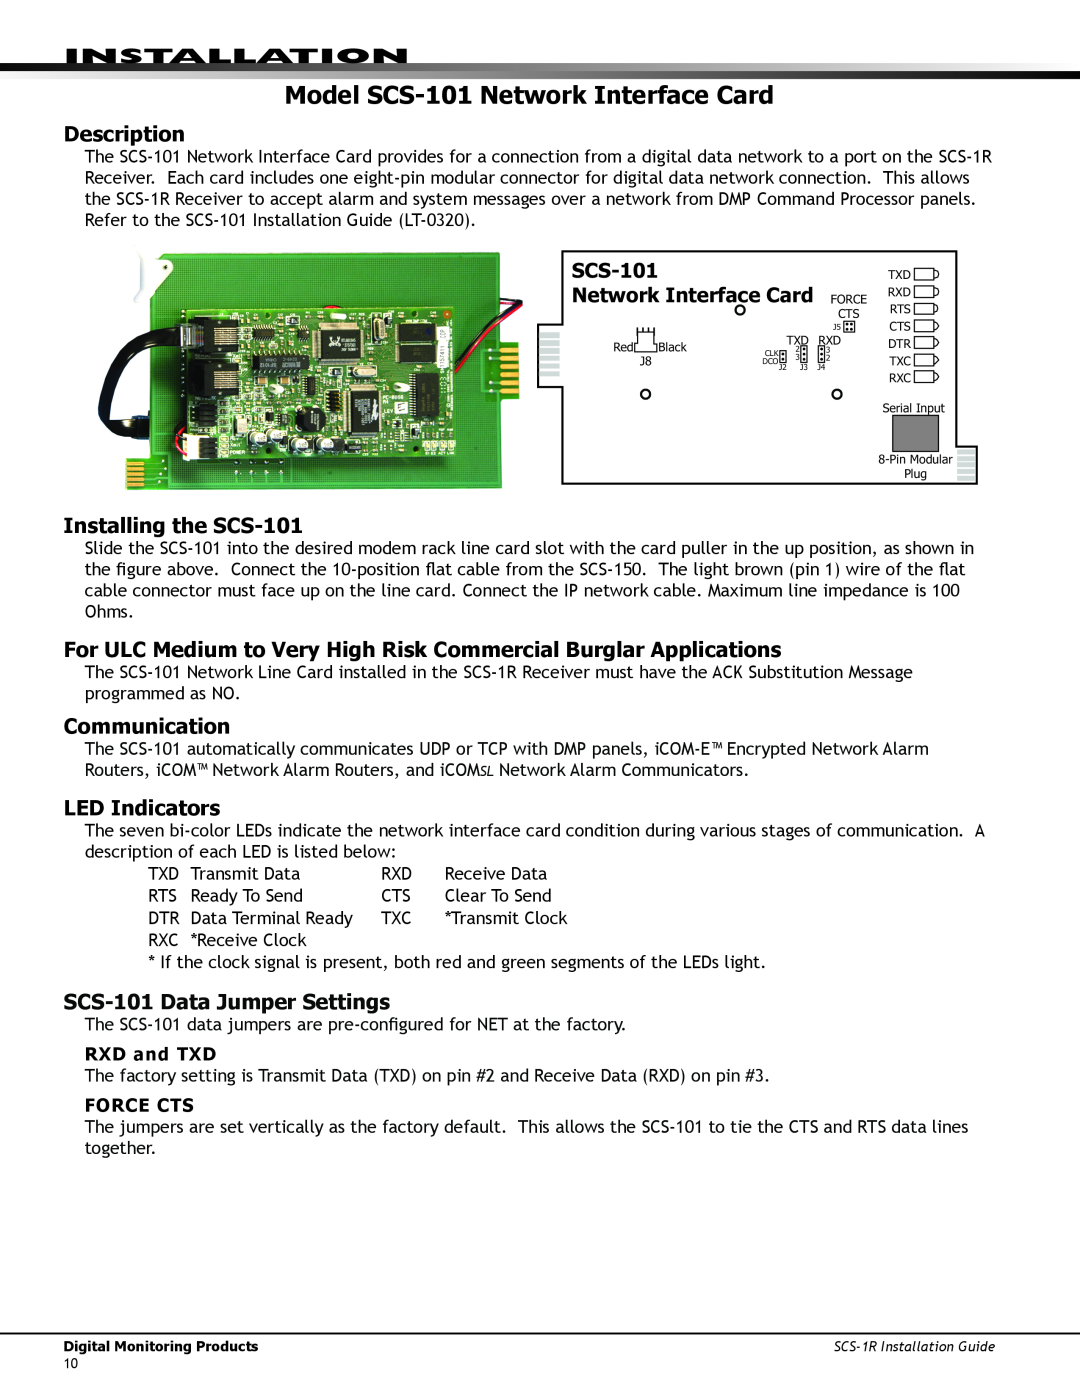 DMP Electronics SCS-1R manual Model SCS-101Network Interface Card, Installing the SCS-101, Communication, Installation 